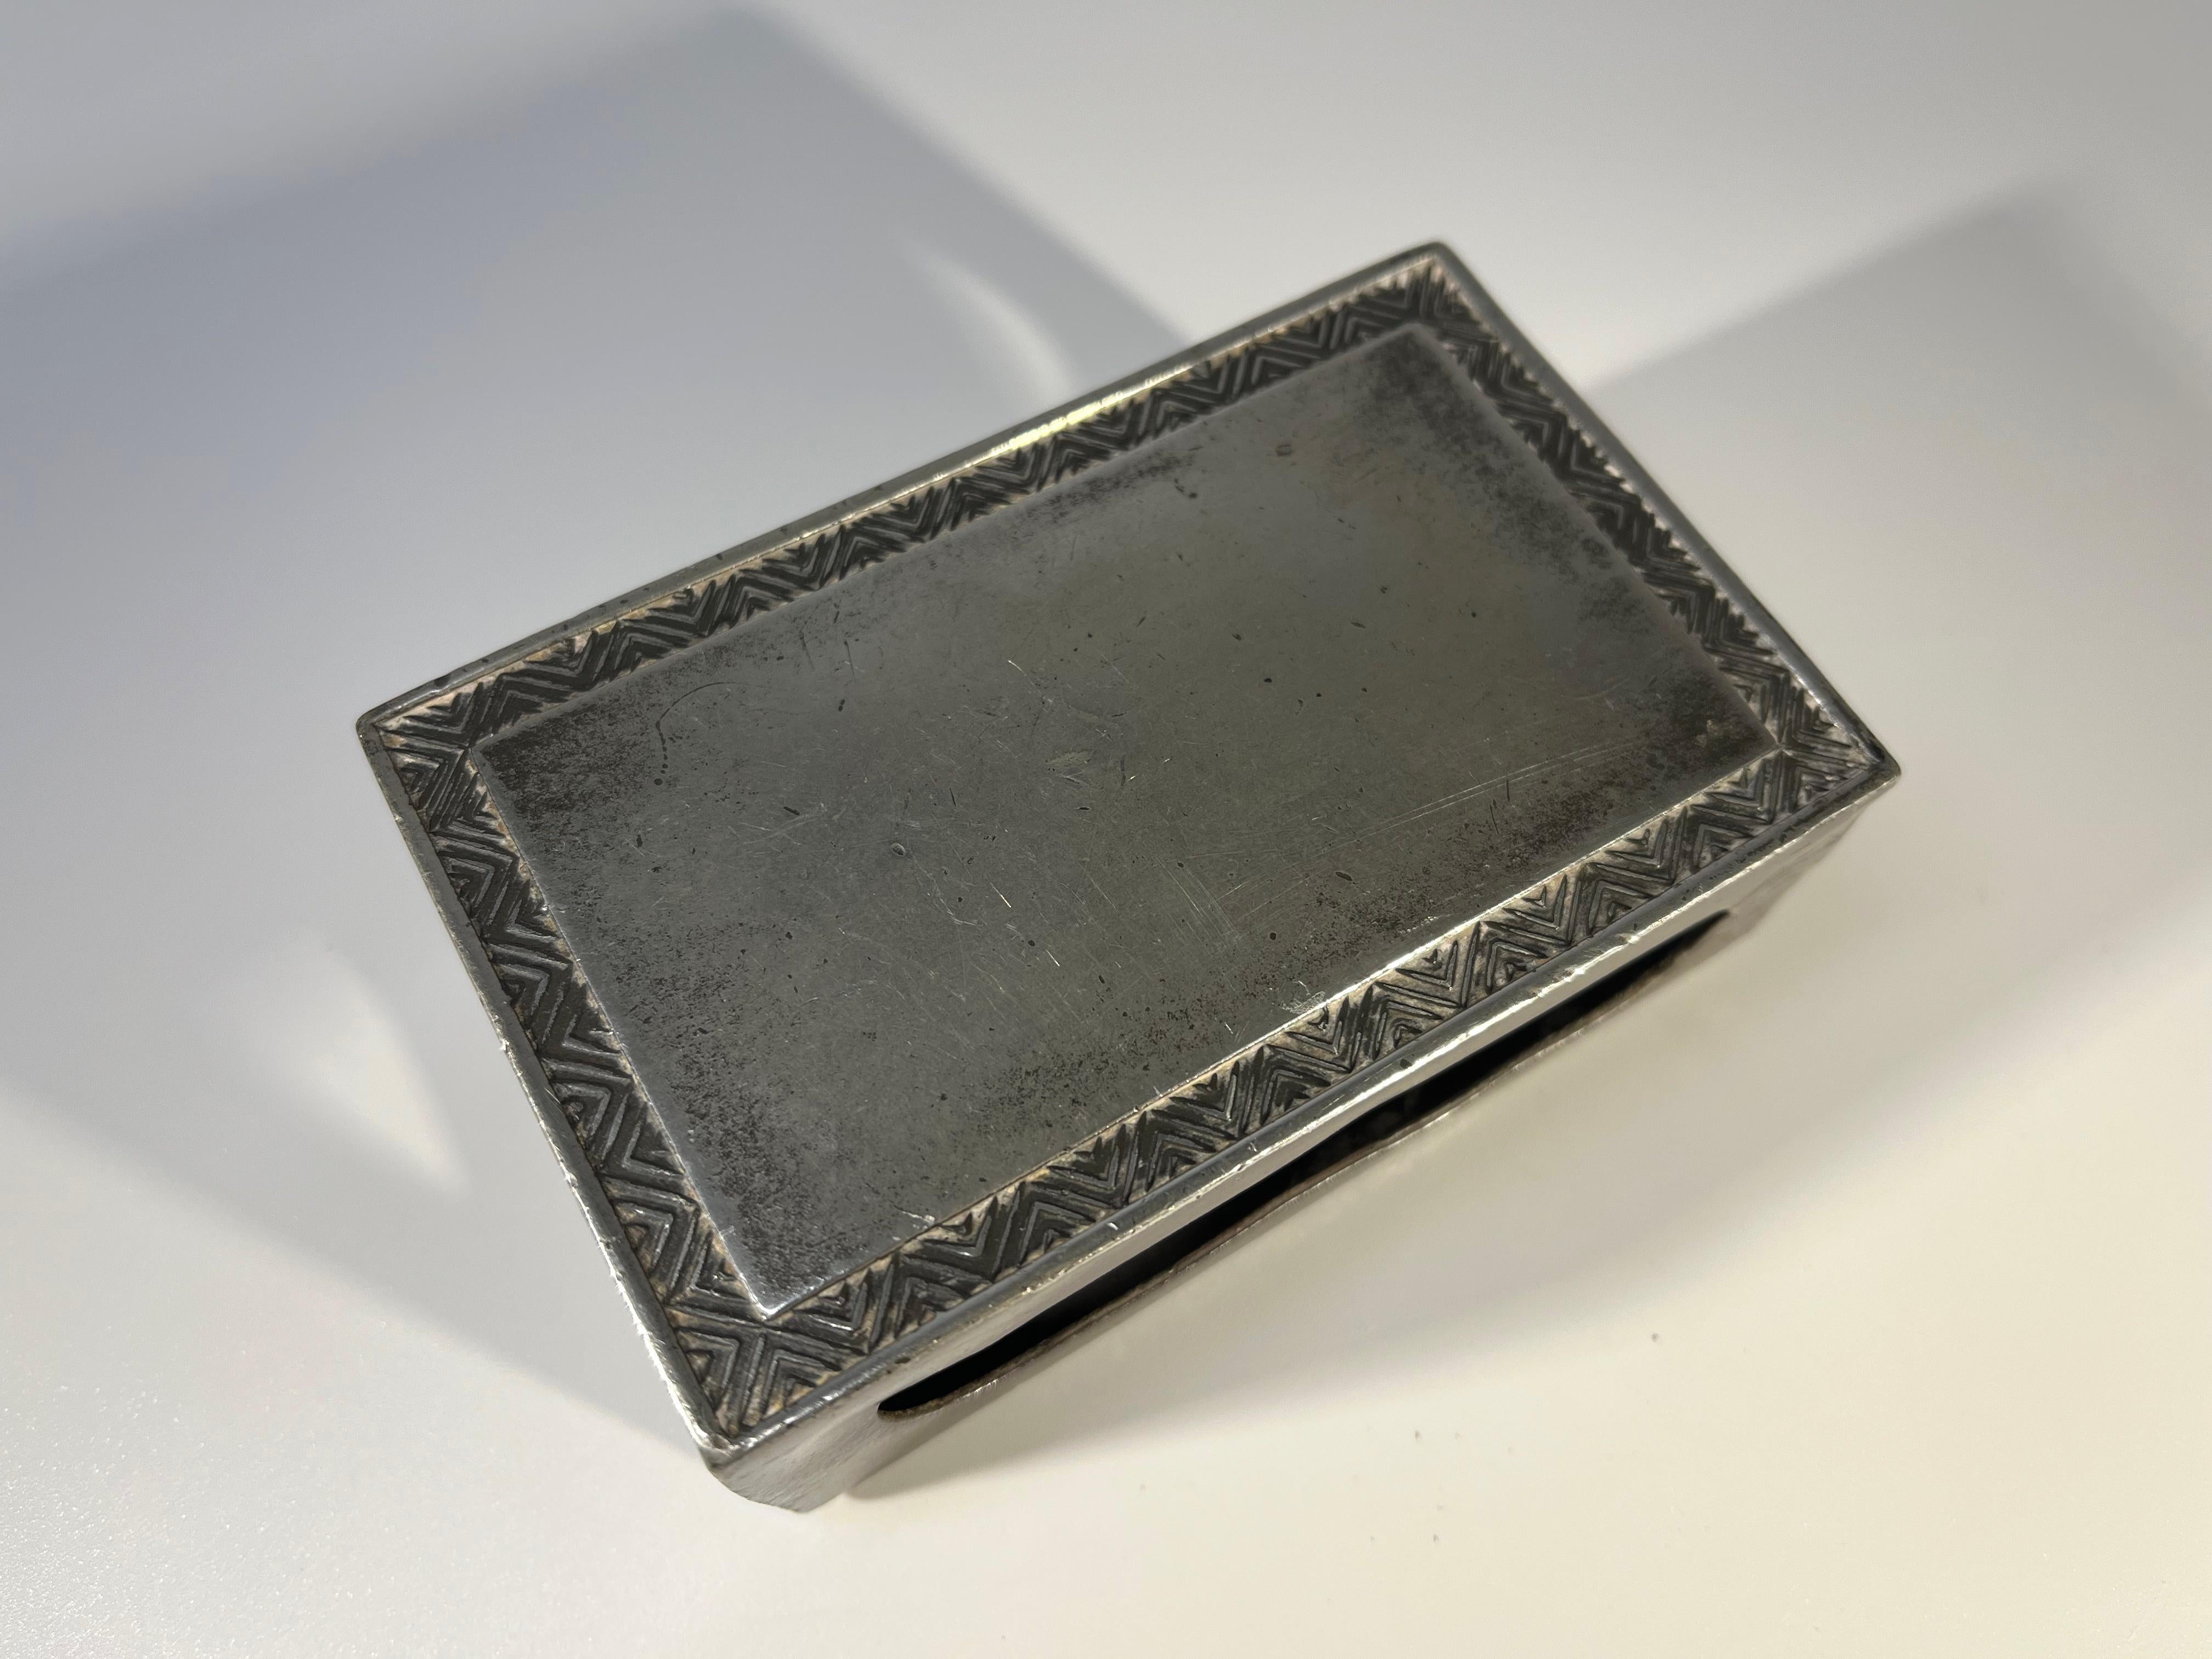 Just Andersen of Denmark, pewter stylised large match box holder
Decorative chevron patterning border
Circa 1930's
Stamped 1497 on side panel
Height 1.5 inch, Width 4 inch, Depth 2.5 inch
In good condition. Has typical patina wear
Wear consistent